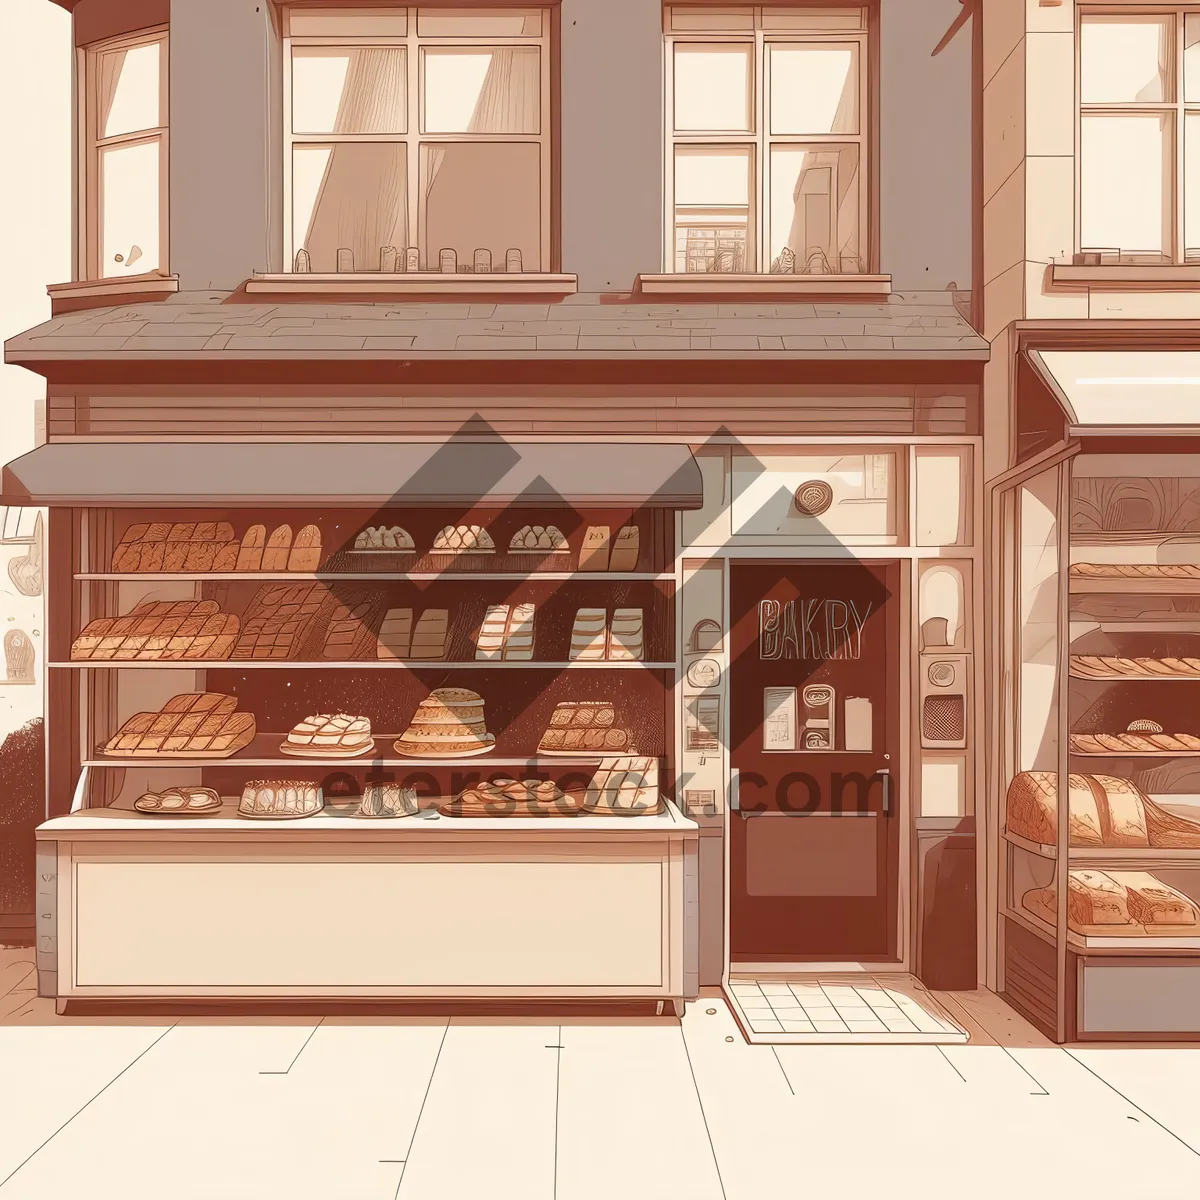 Picture of Urban Brick Facade with Bakery Shop